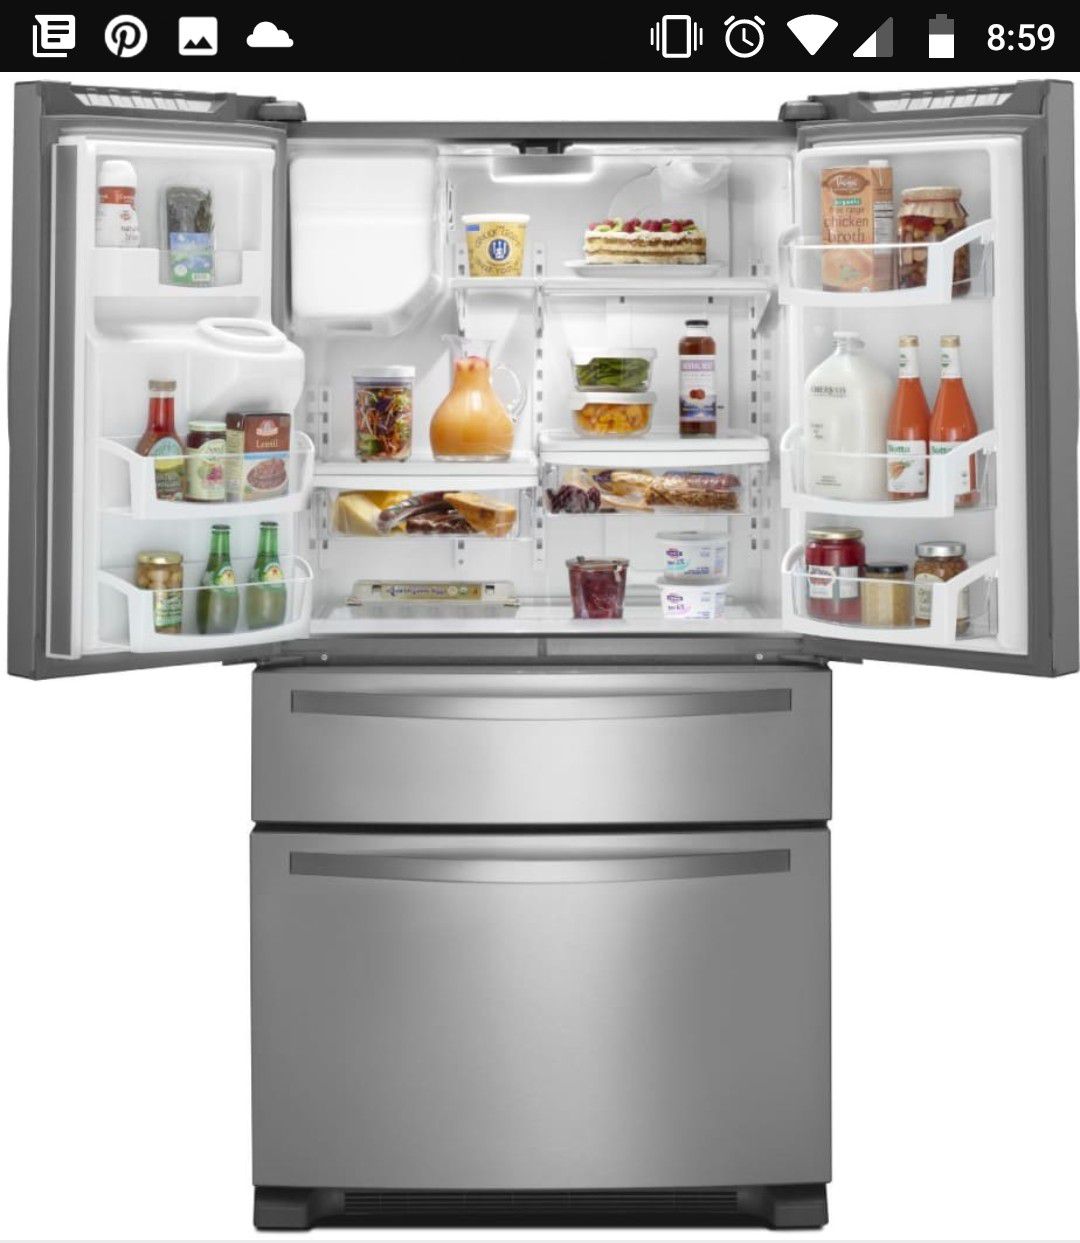 Whirlpool WRX735SDBM 25.0 cu. ft. French Door Refrigerator w/ Refrigerated Drawer - Stainless Steel